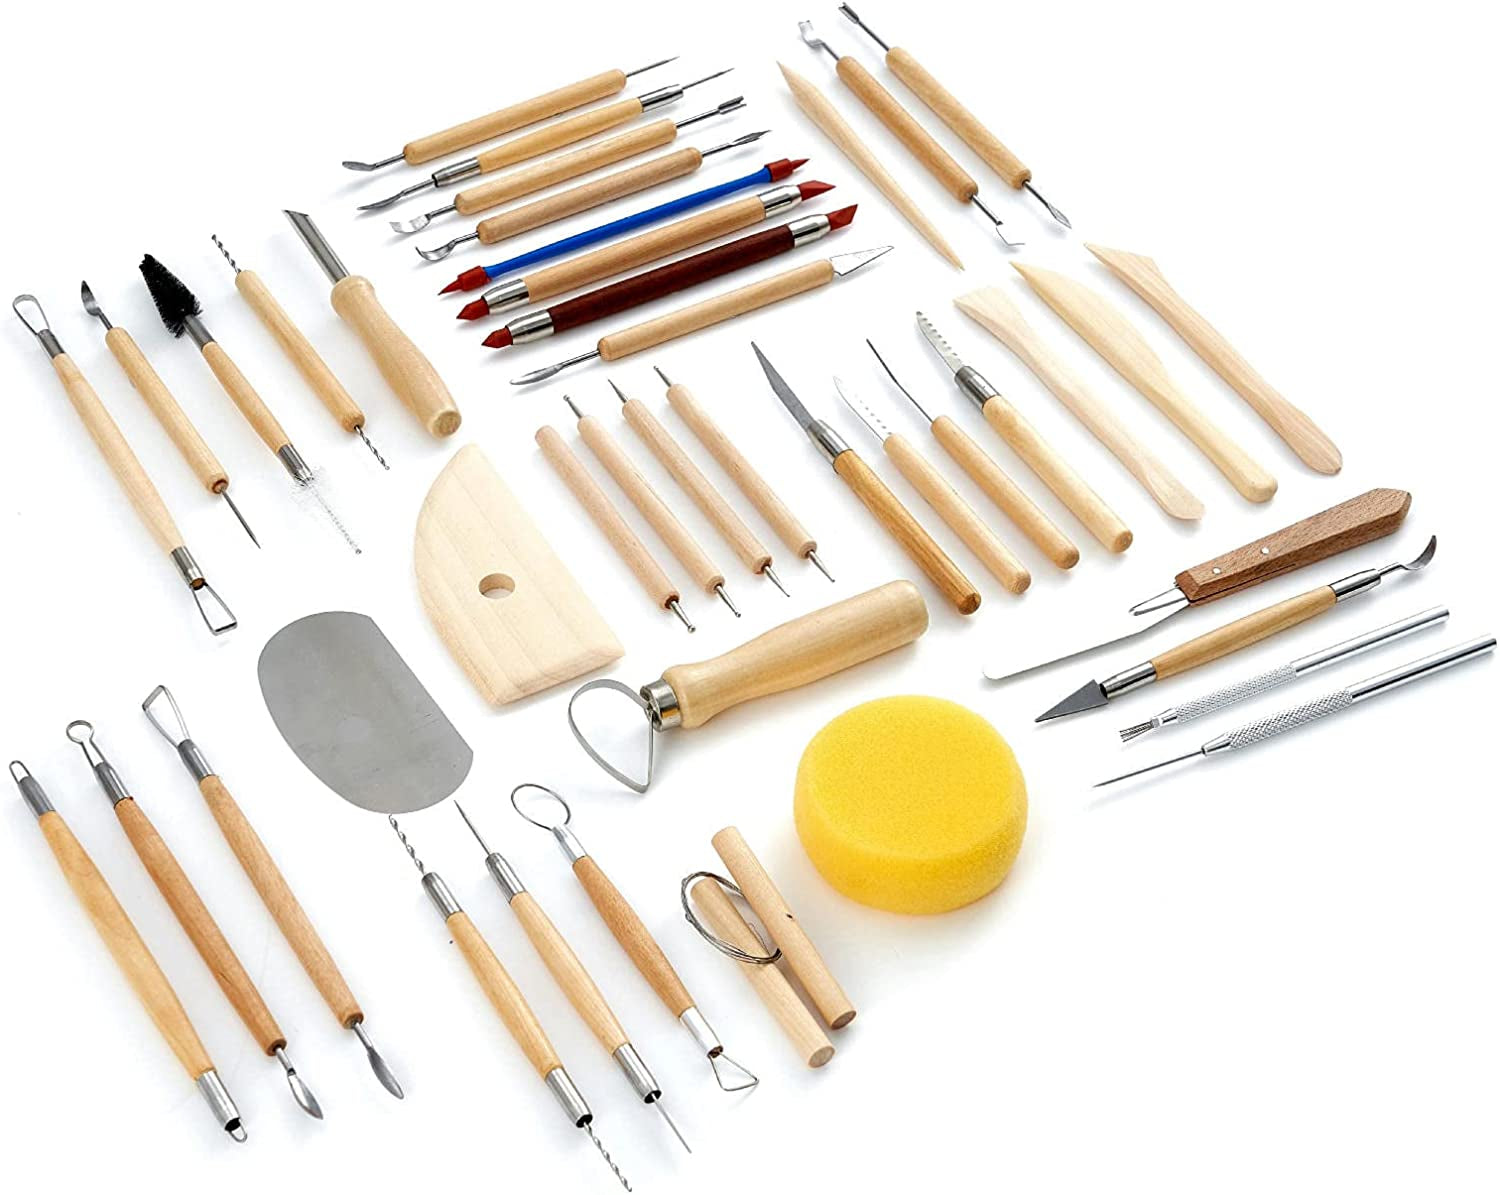  Pottery Clay Sculpting Modeling Smoothing Tools, 43Pcs